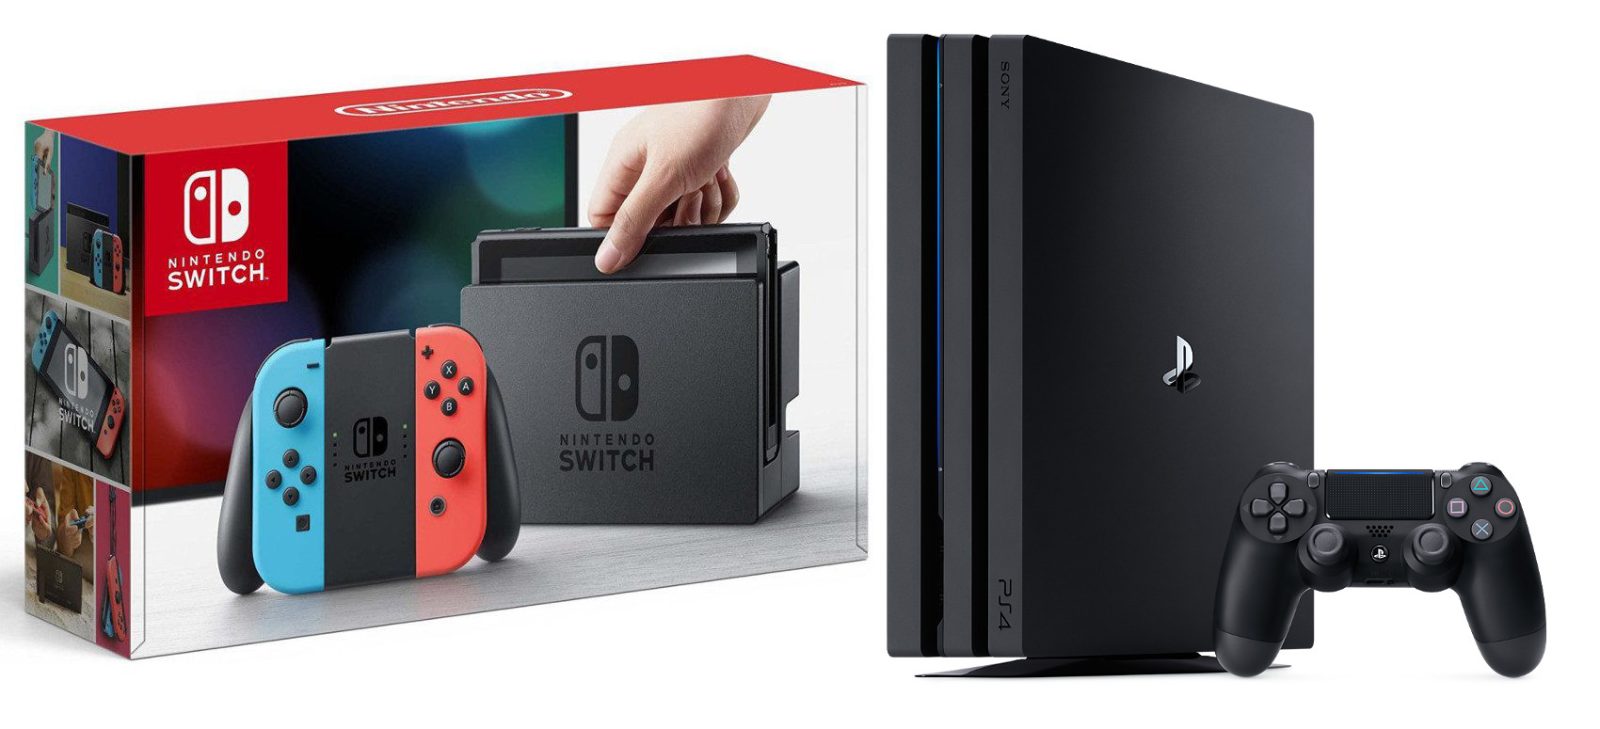 Gamestop Now Offers Up To 300 In Store Credit With Ps4 Pro